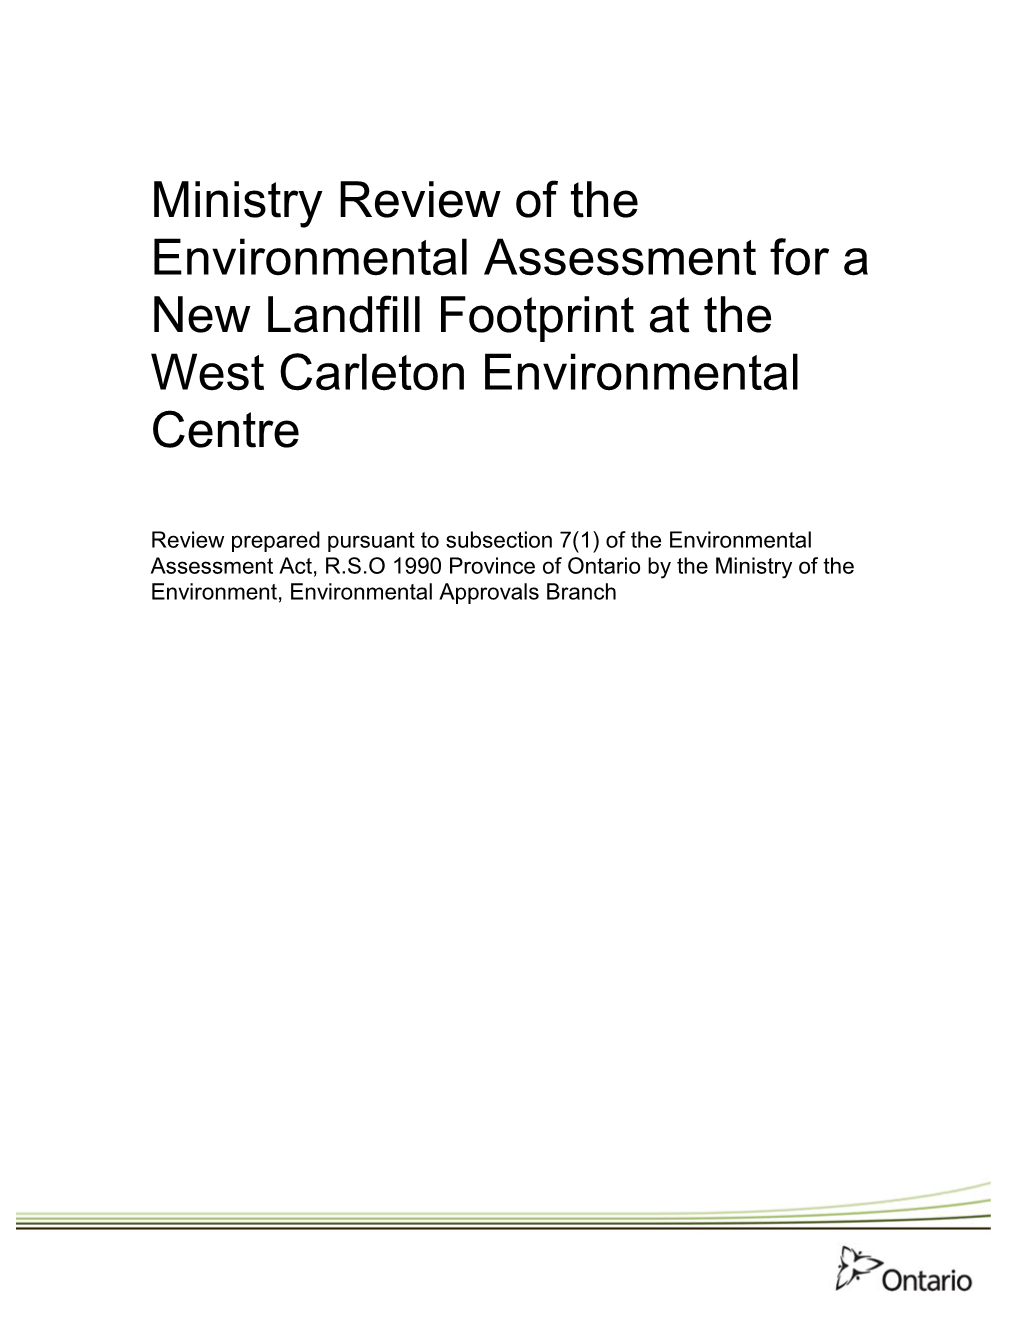 Ministry Review of the Environmental Assessment for the New Landfill